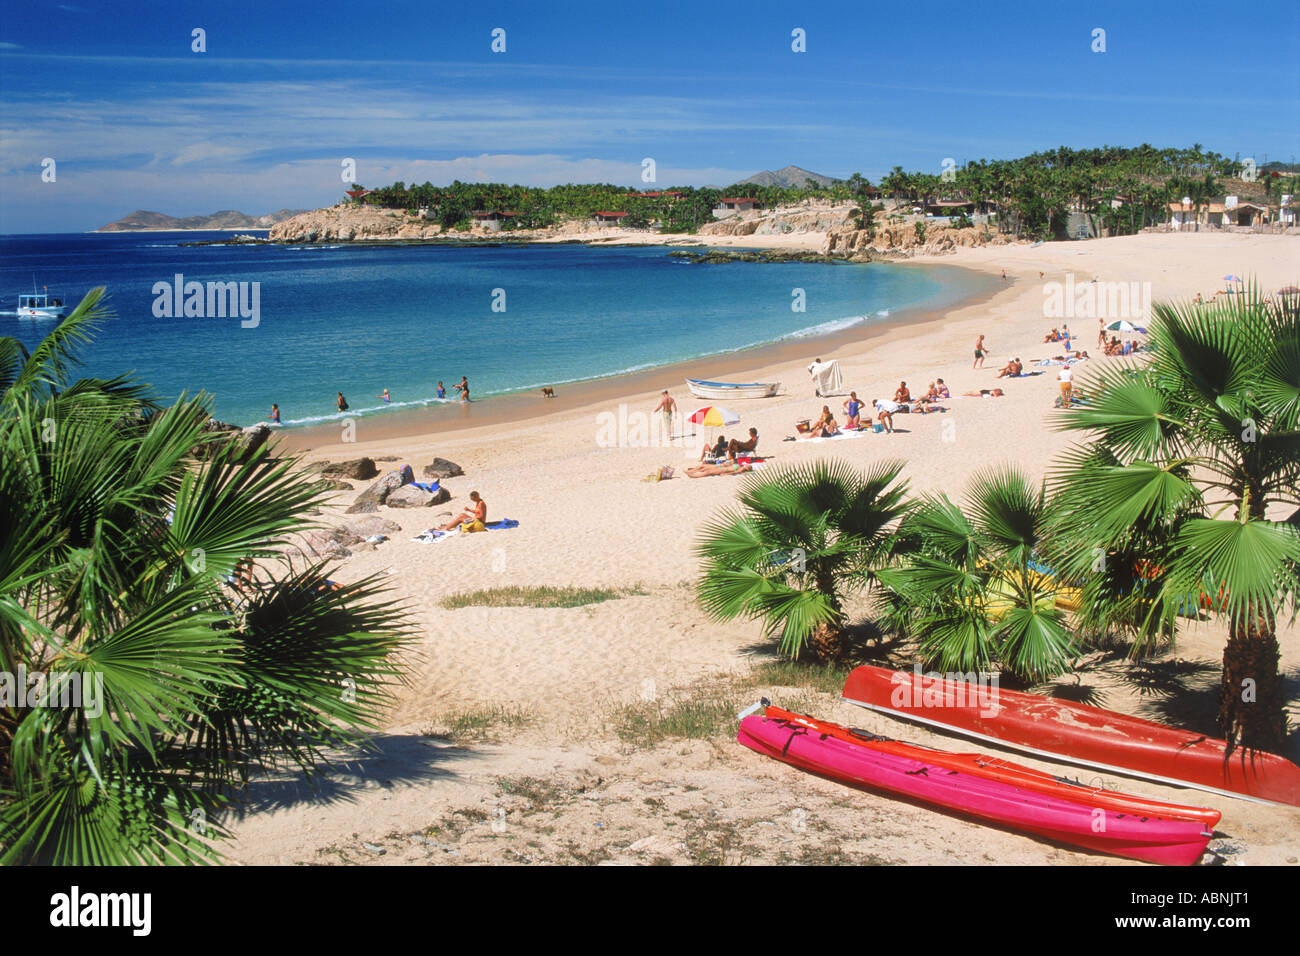 Beach with tourists and kayaks on blue Pacific Ocean at San Jose Del Cabo in Baja, Mexico Stock Photo